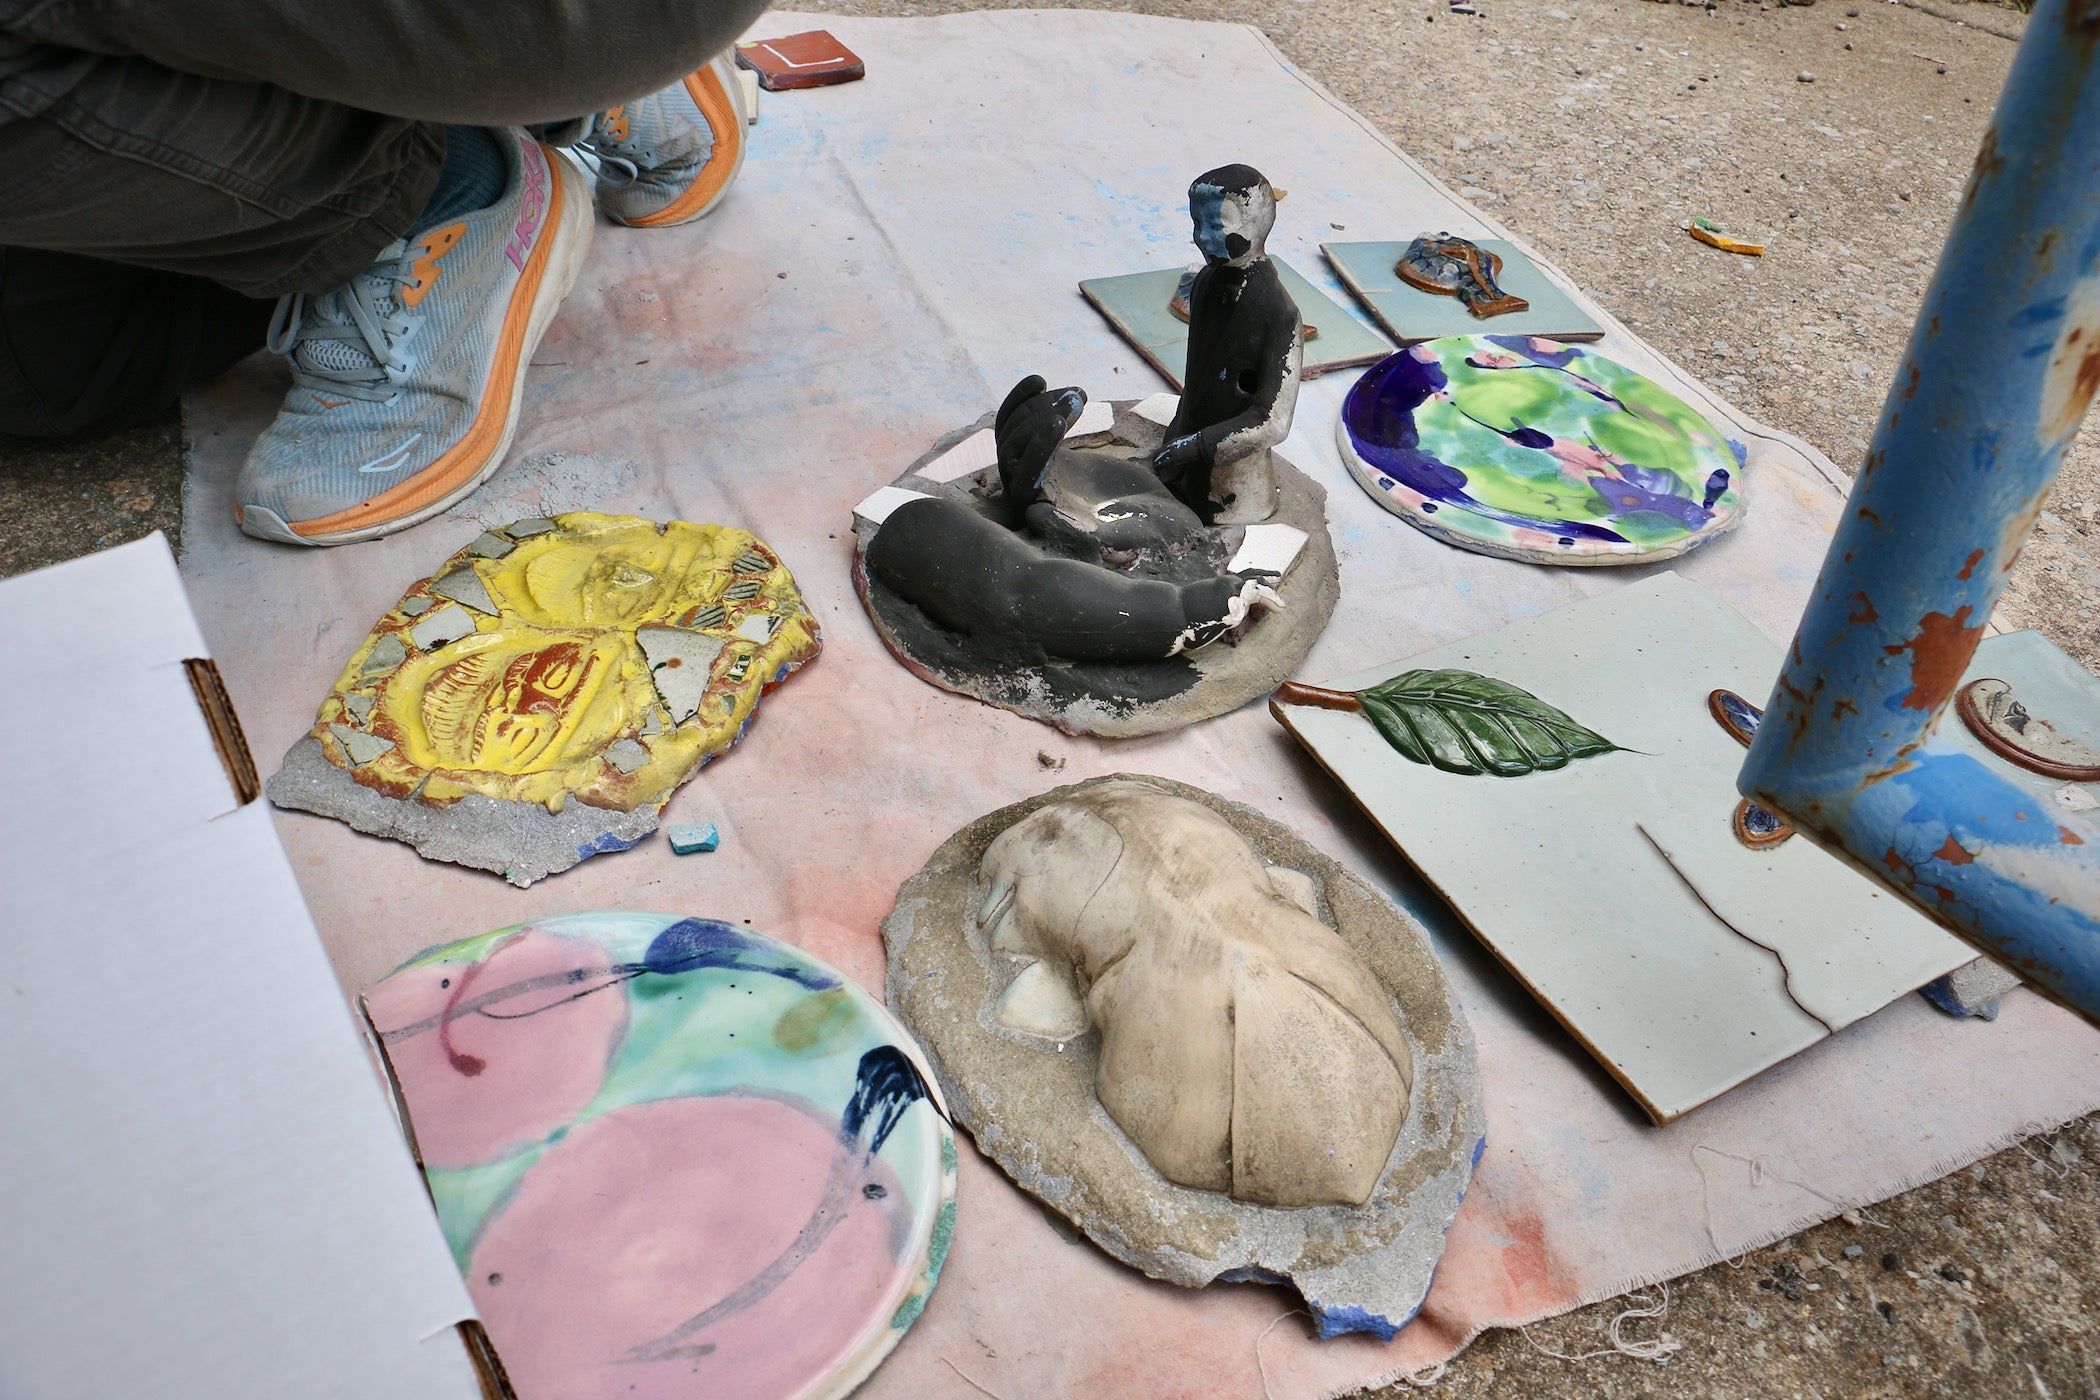 Sculptures and pieces of a mural lie on a piece of canvas on the ground.